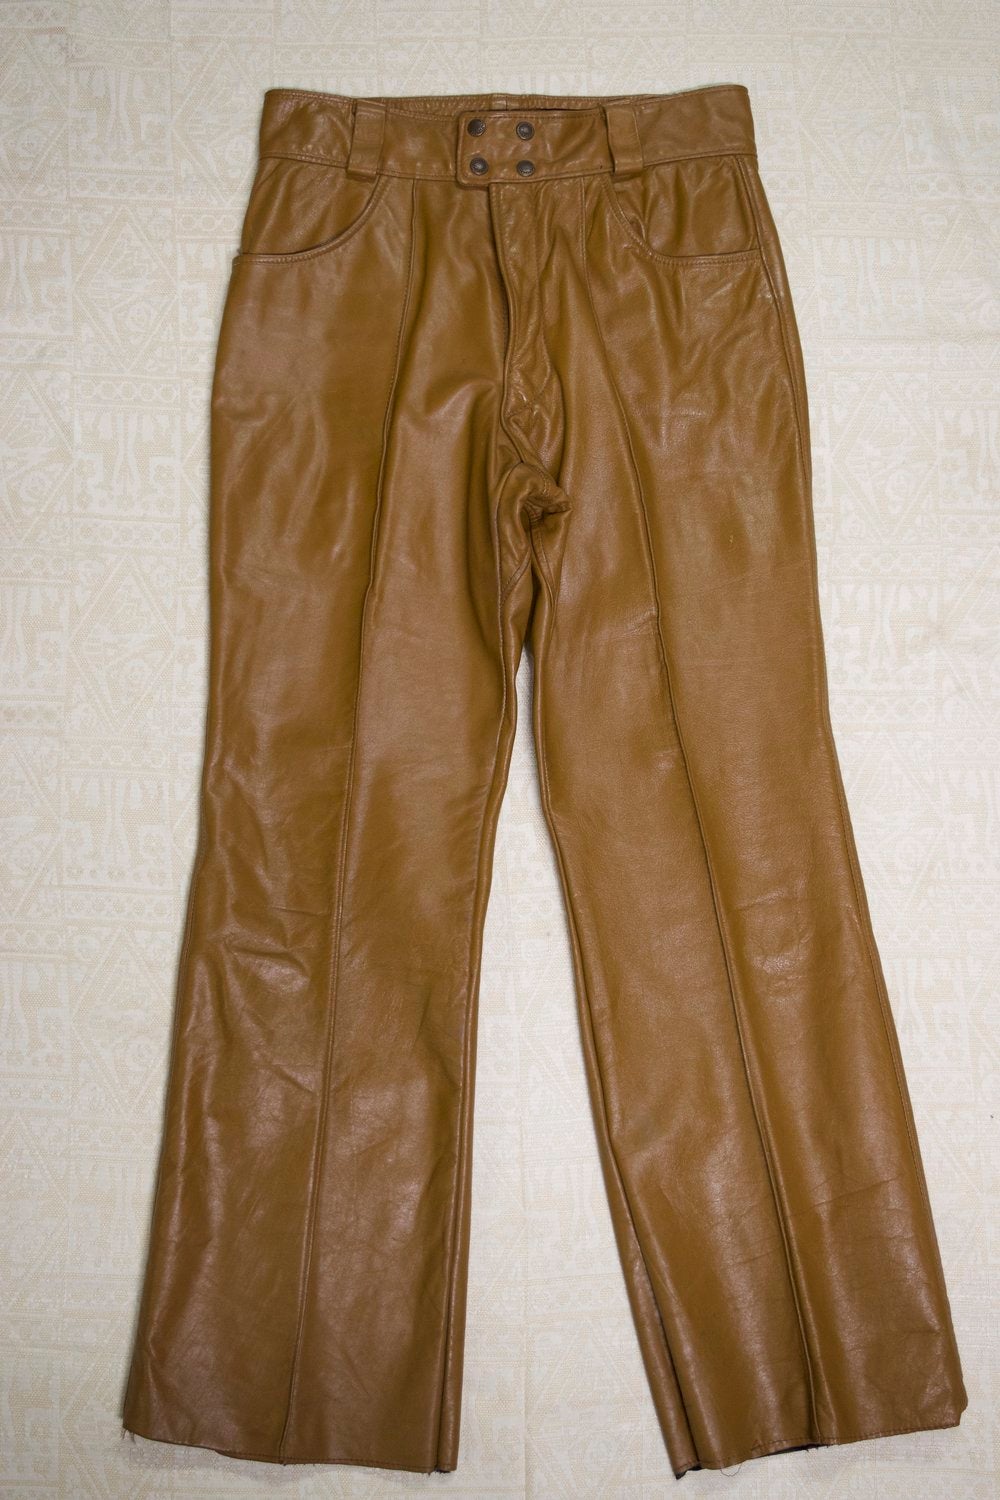 Cool 1970s Leather Pants – TELL THEM IT'S VINTAGE